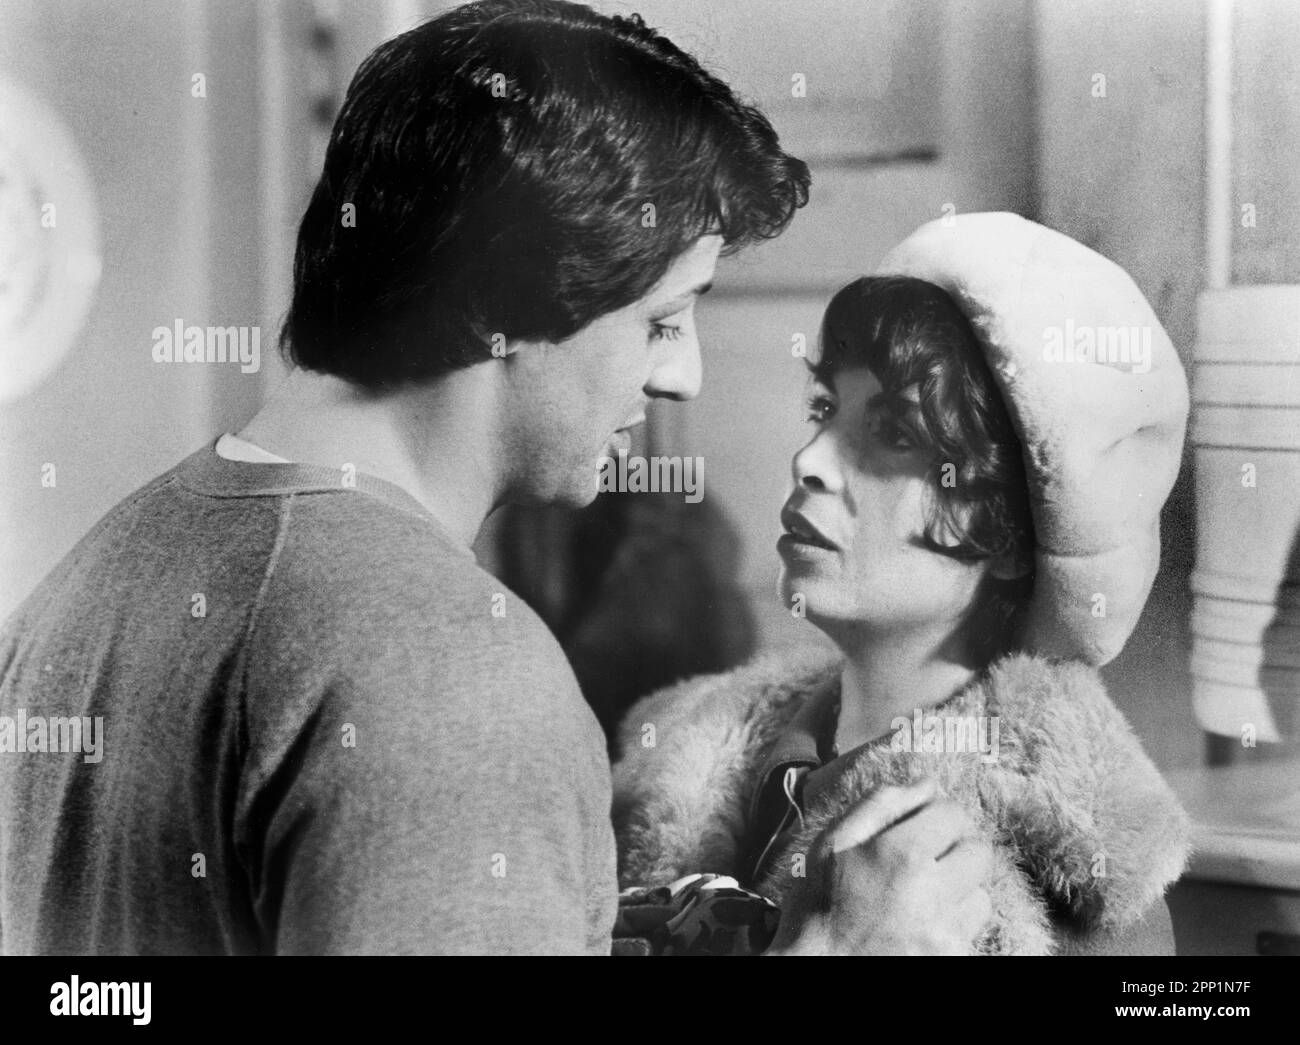 Sylvester Stallone, Talia Shire, on-set of the Film, 'Rocky', United Artists, 1976 Stock Photo